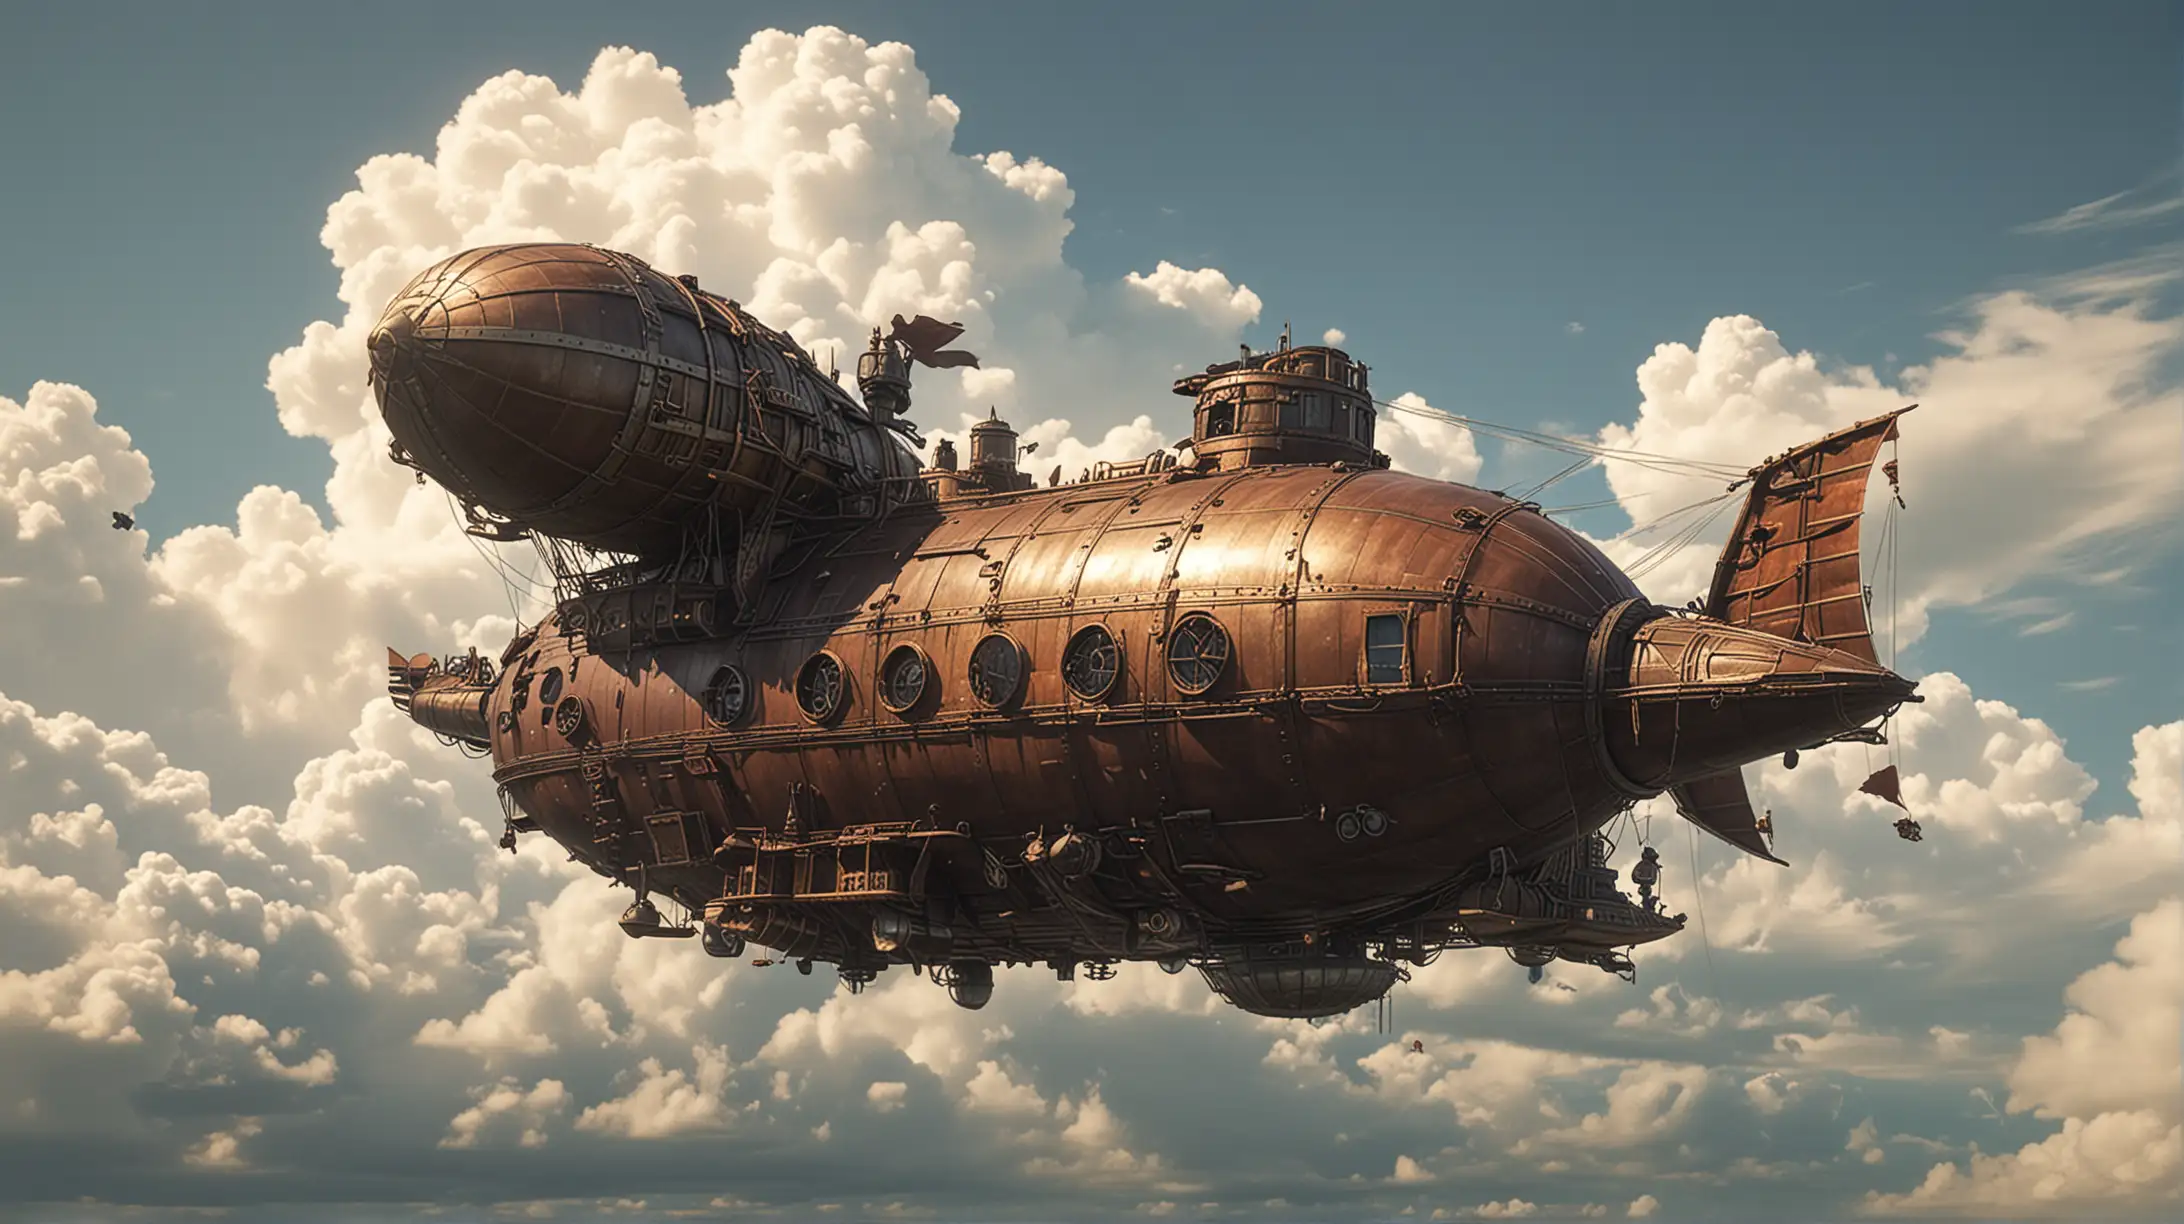 Steampunk Airship Adventure in the Clouds